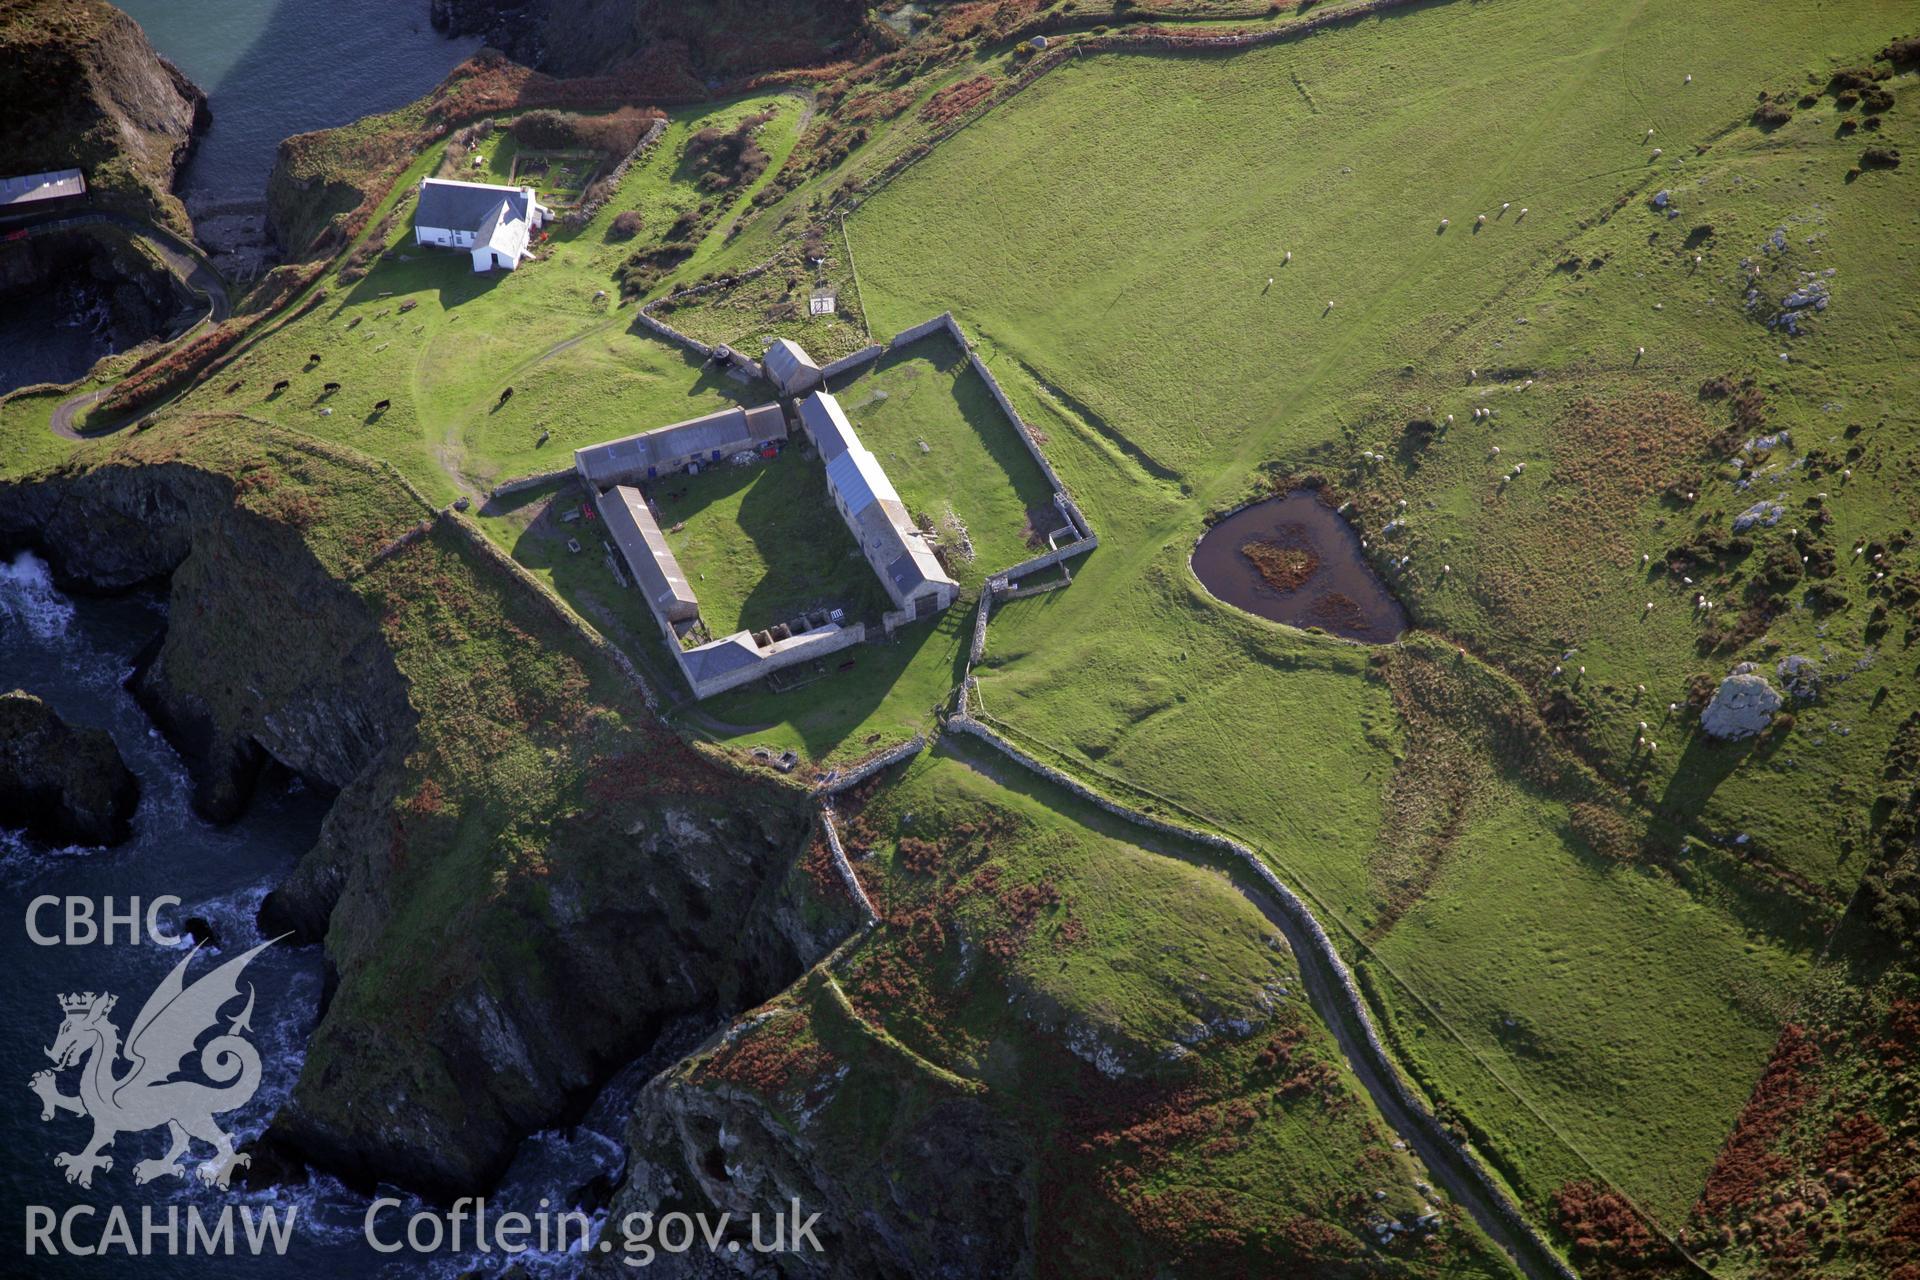 RCAHMW colour oblique photograph of Ramsey Island Farm, viewed from the north-east. Taken by O. Davies & T. Driver on 22/11/2013.